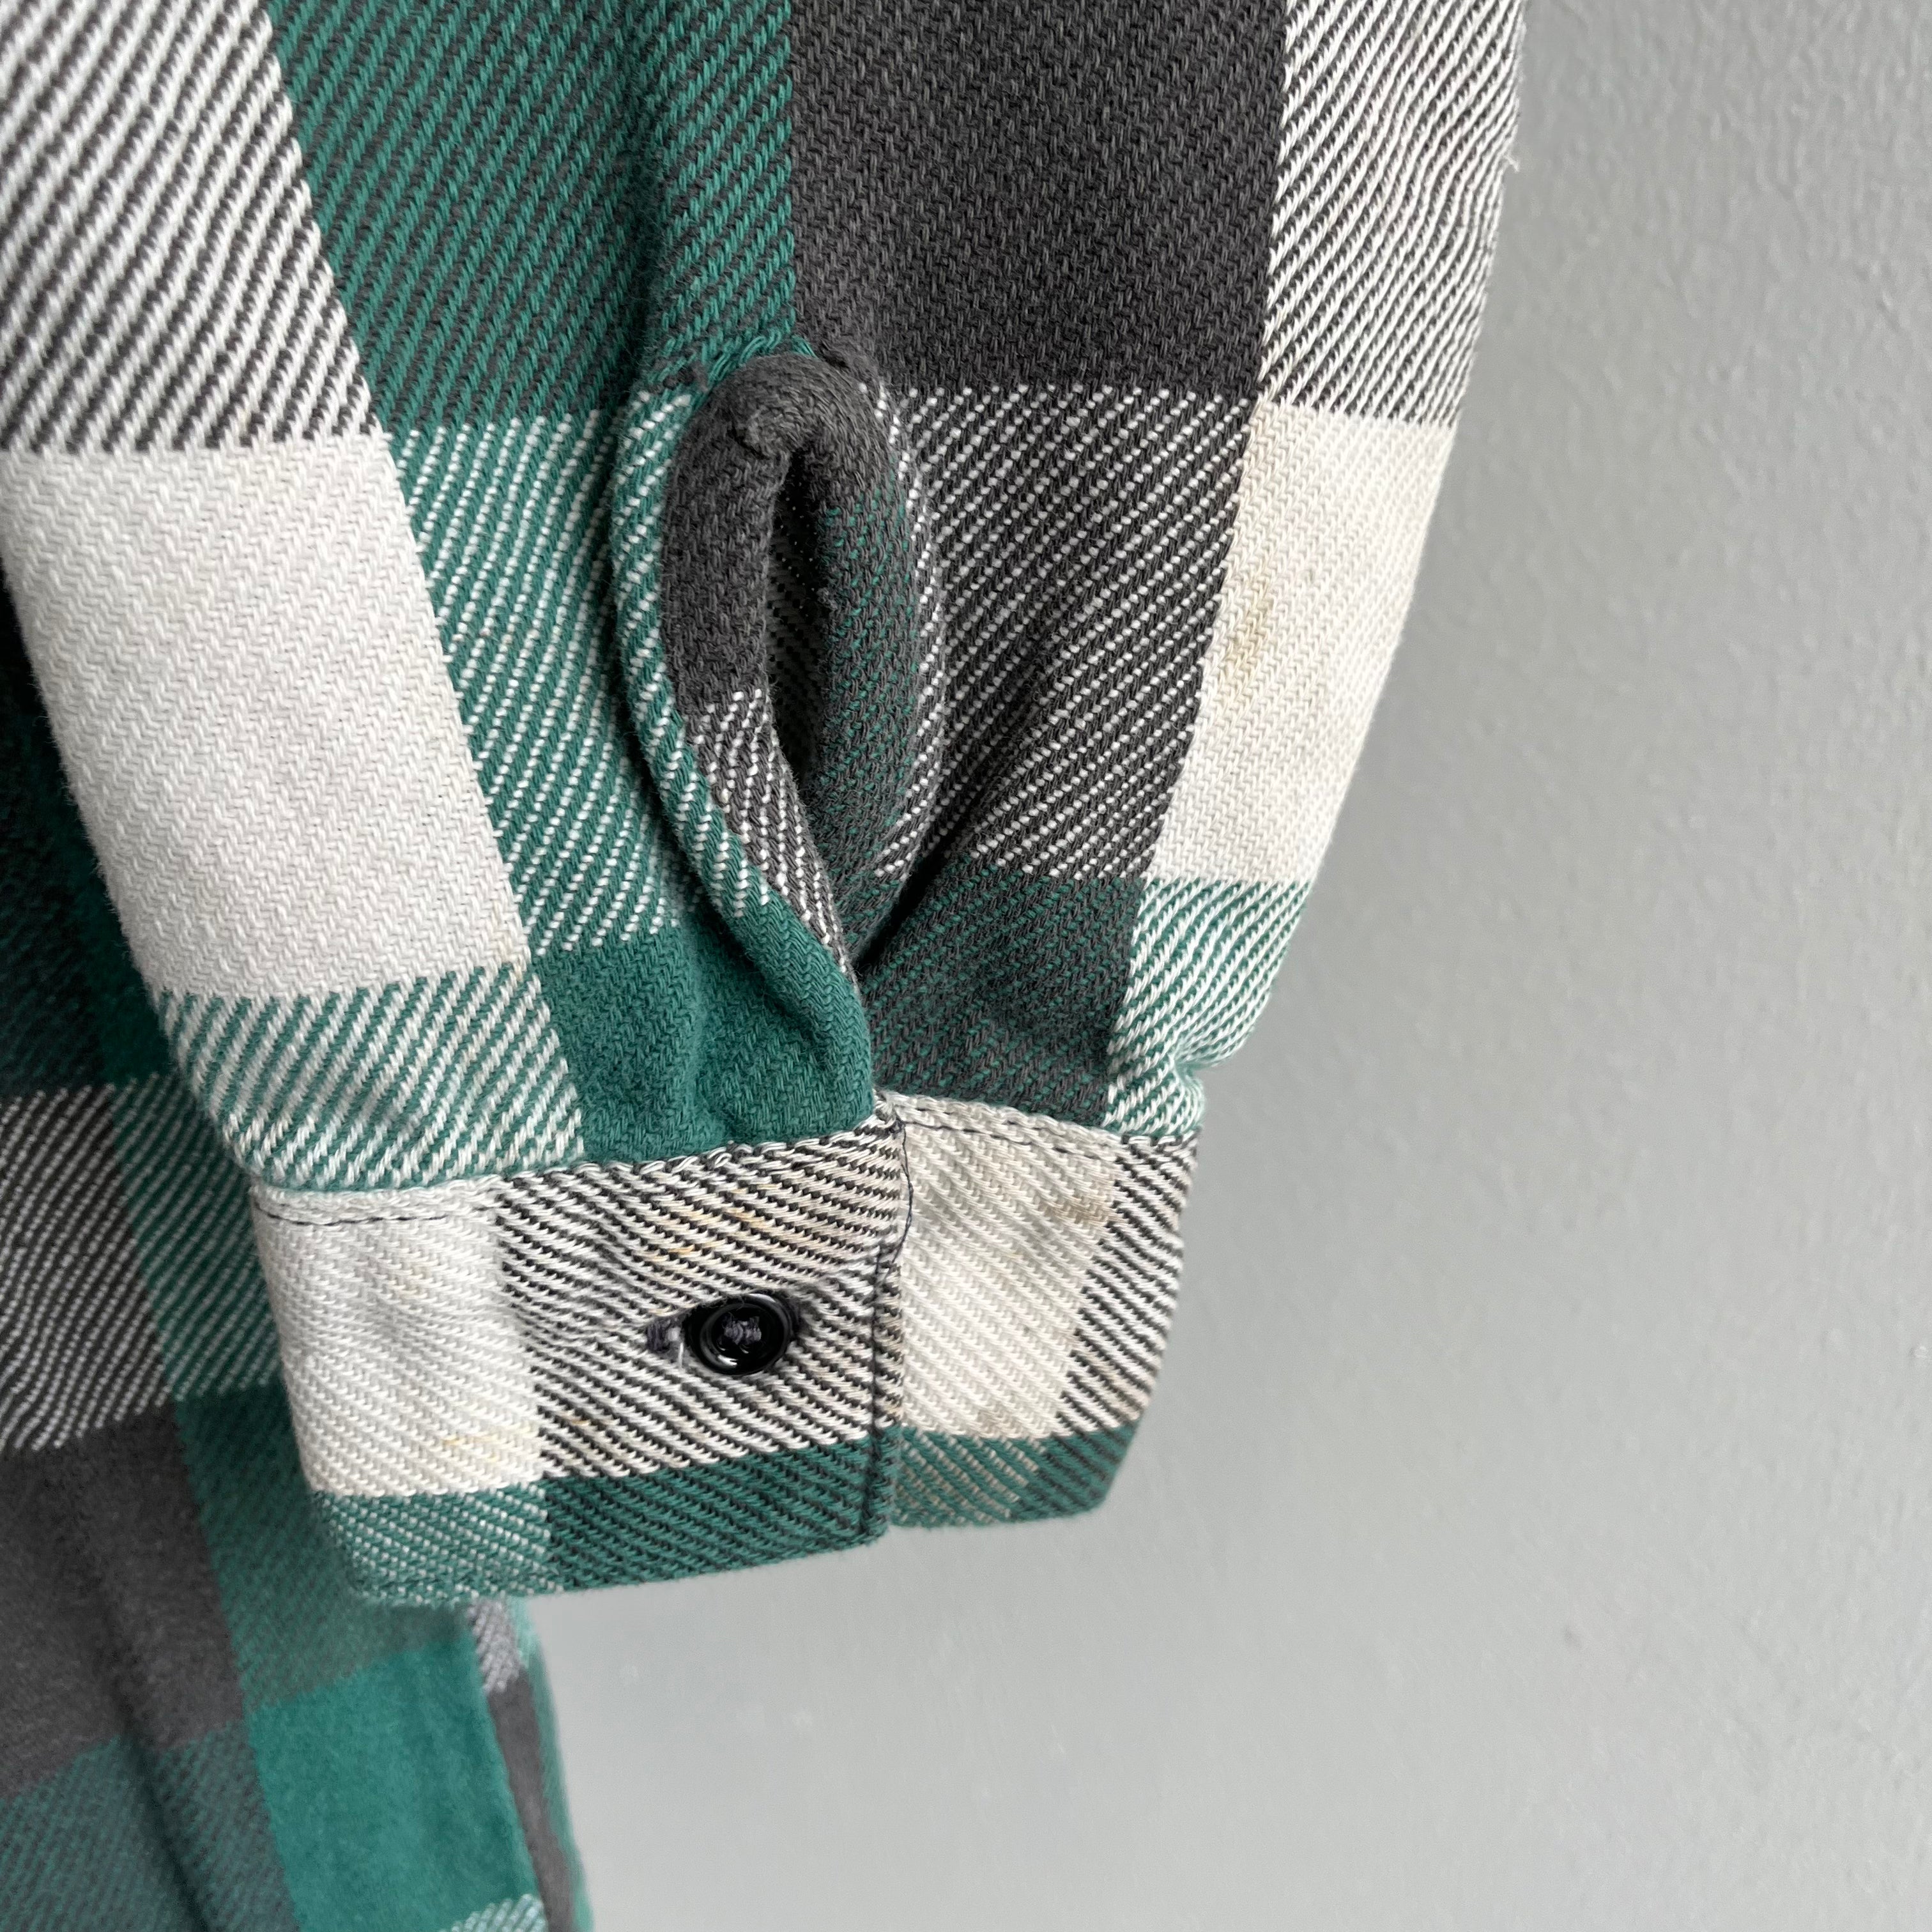 1990s Green and Black Watch Plaid Cotton Flannel by Five Brothers